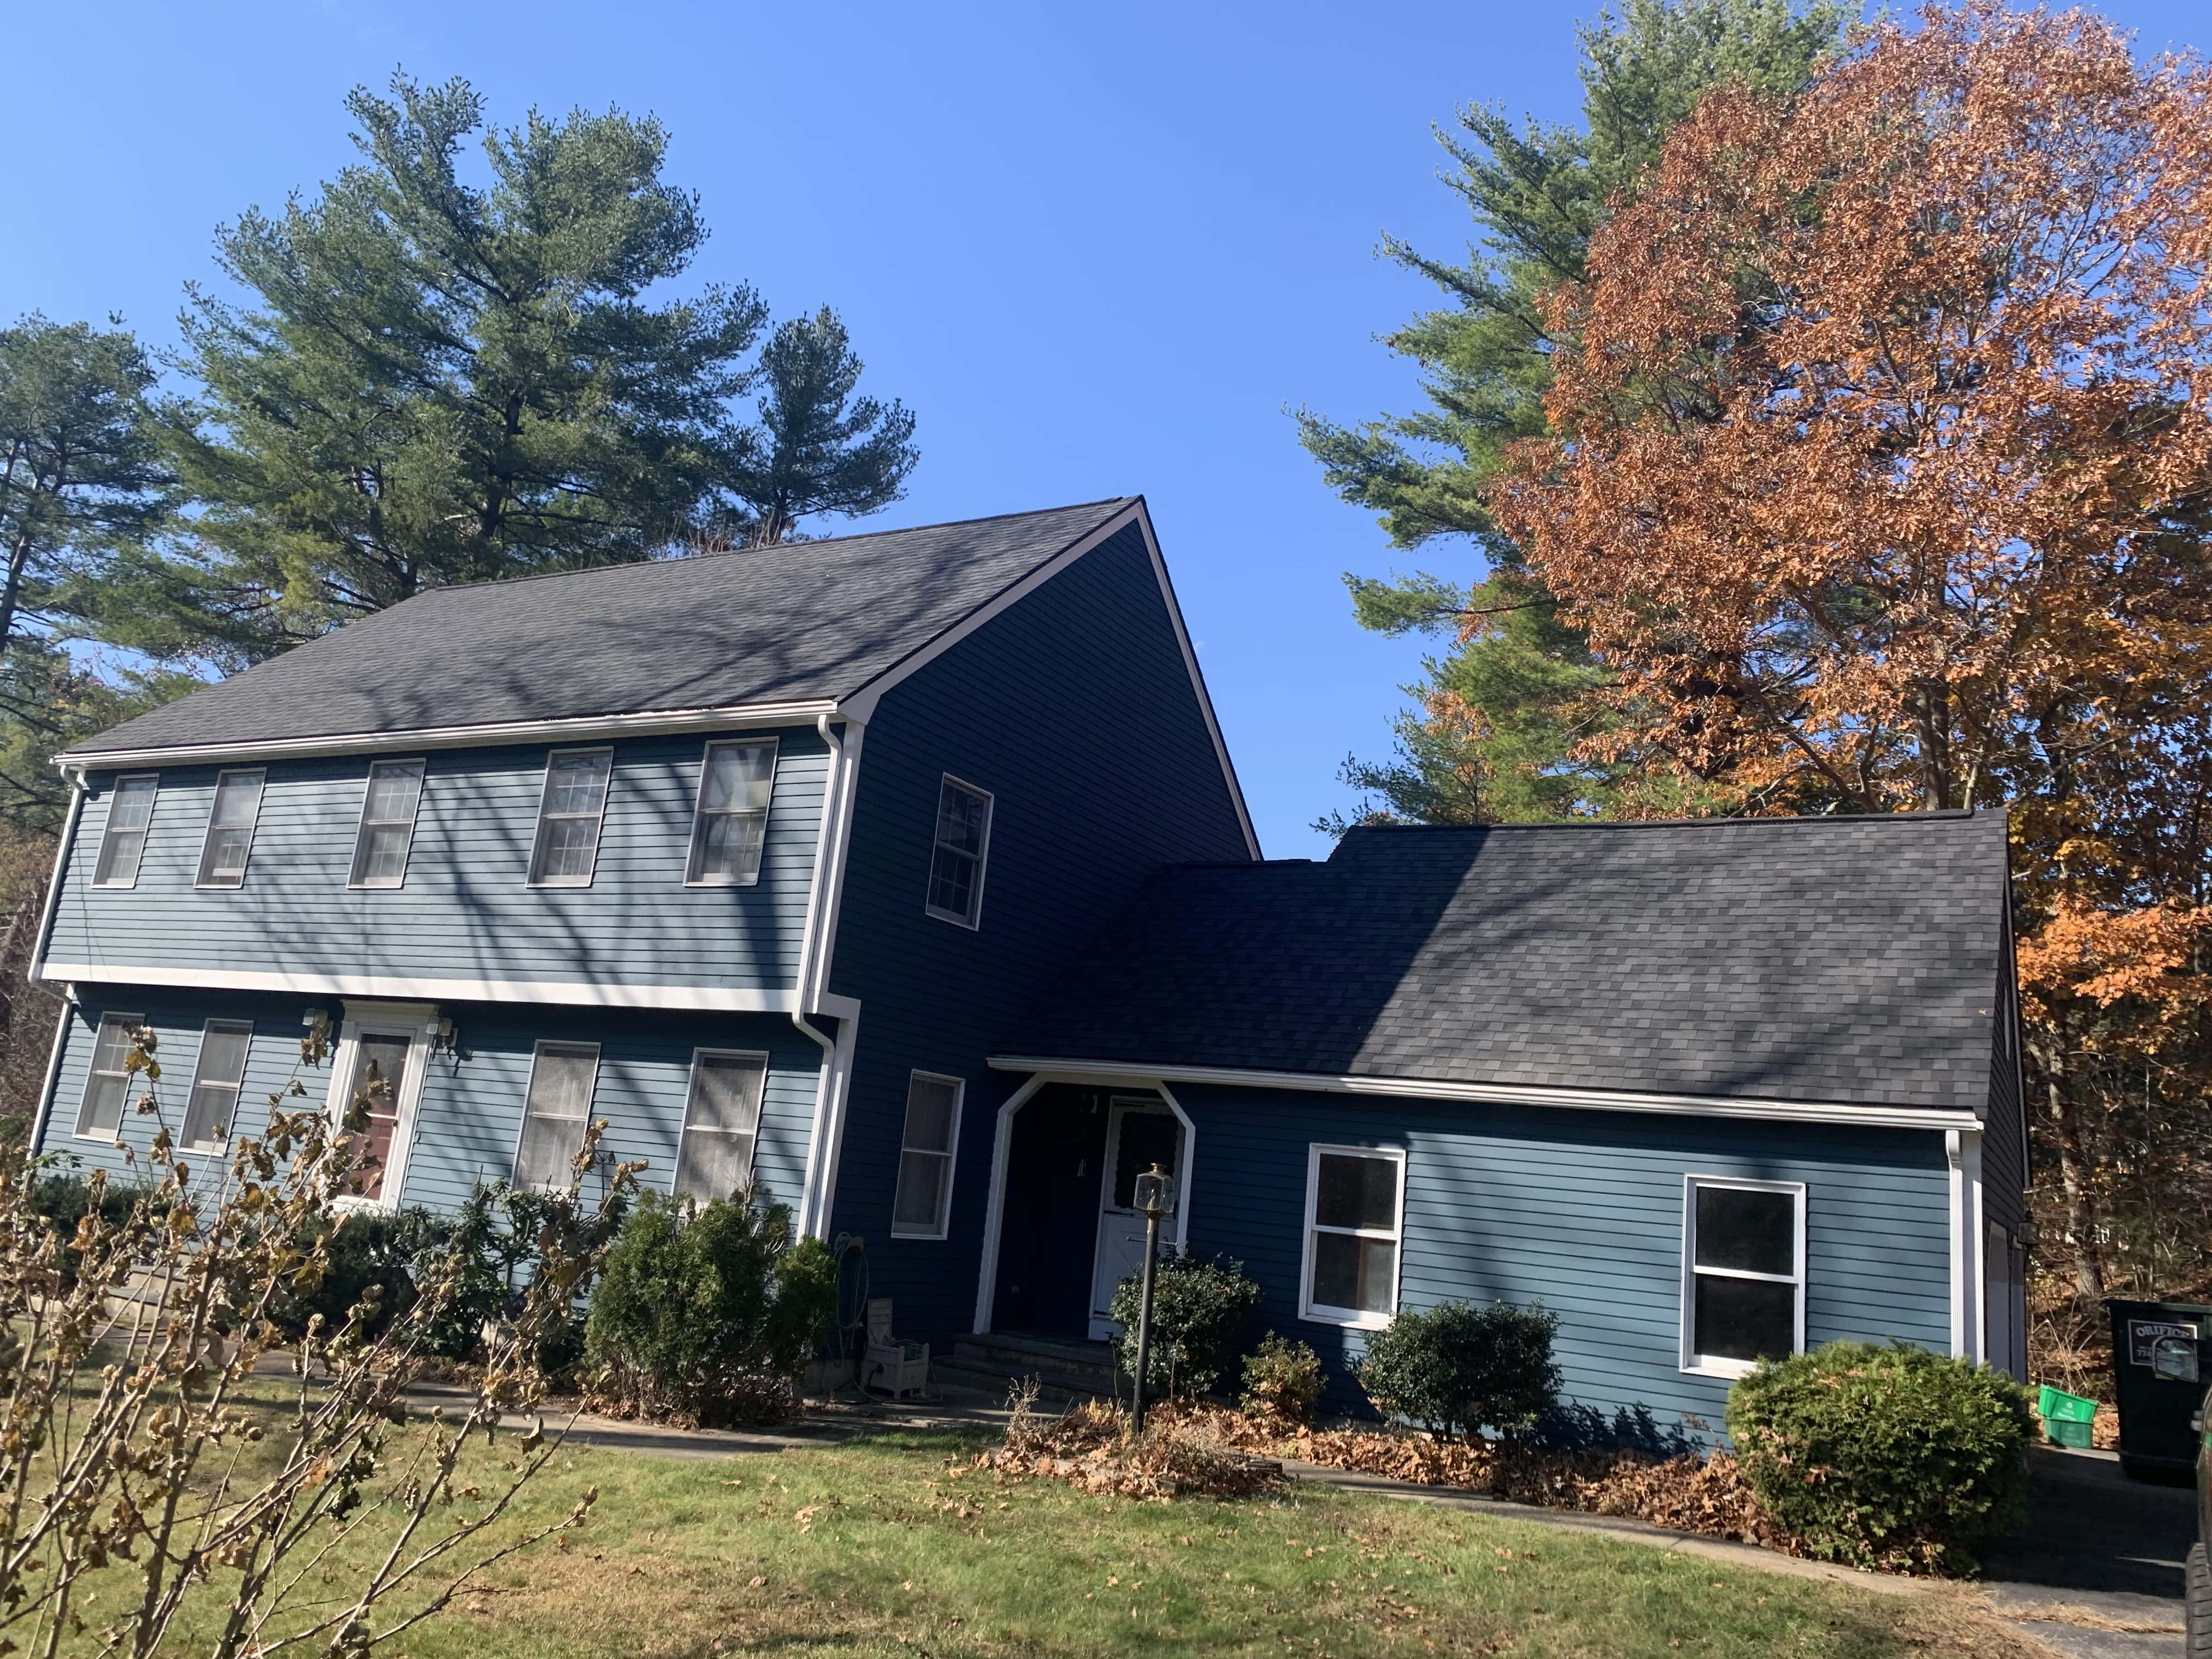 Ben's Construction Inc - Natick, MA, US, metal roof installers near me